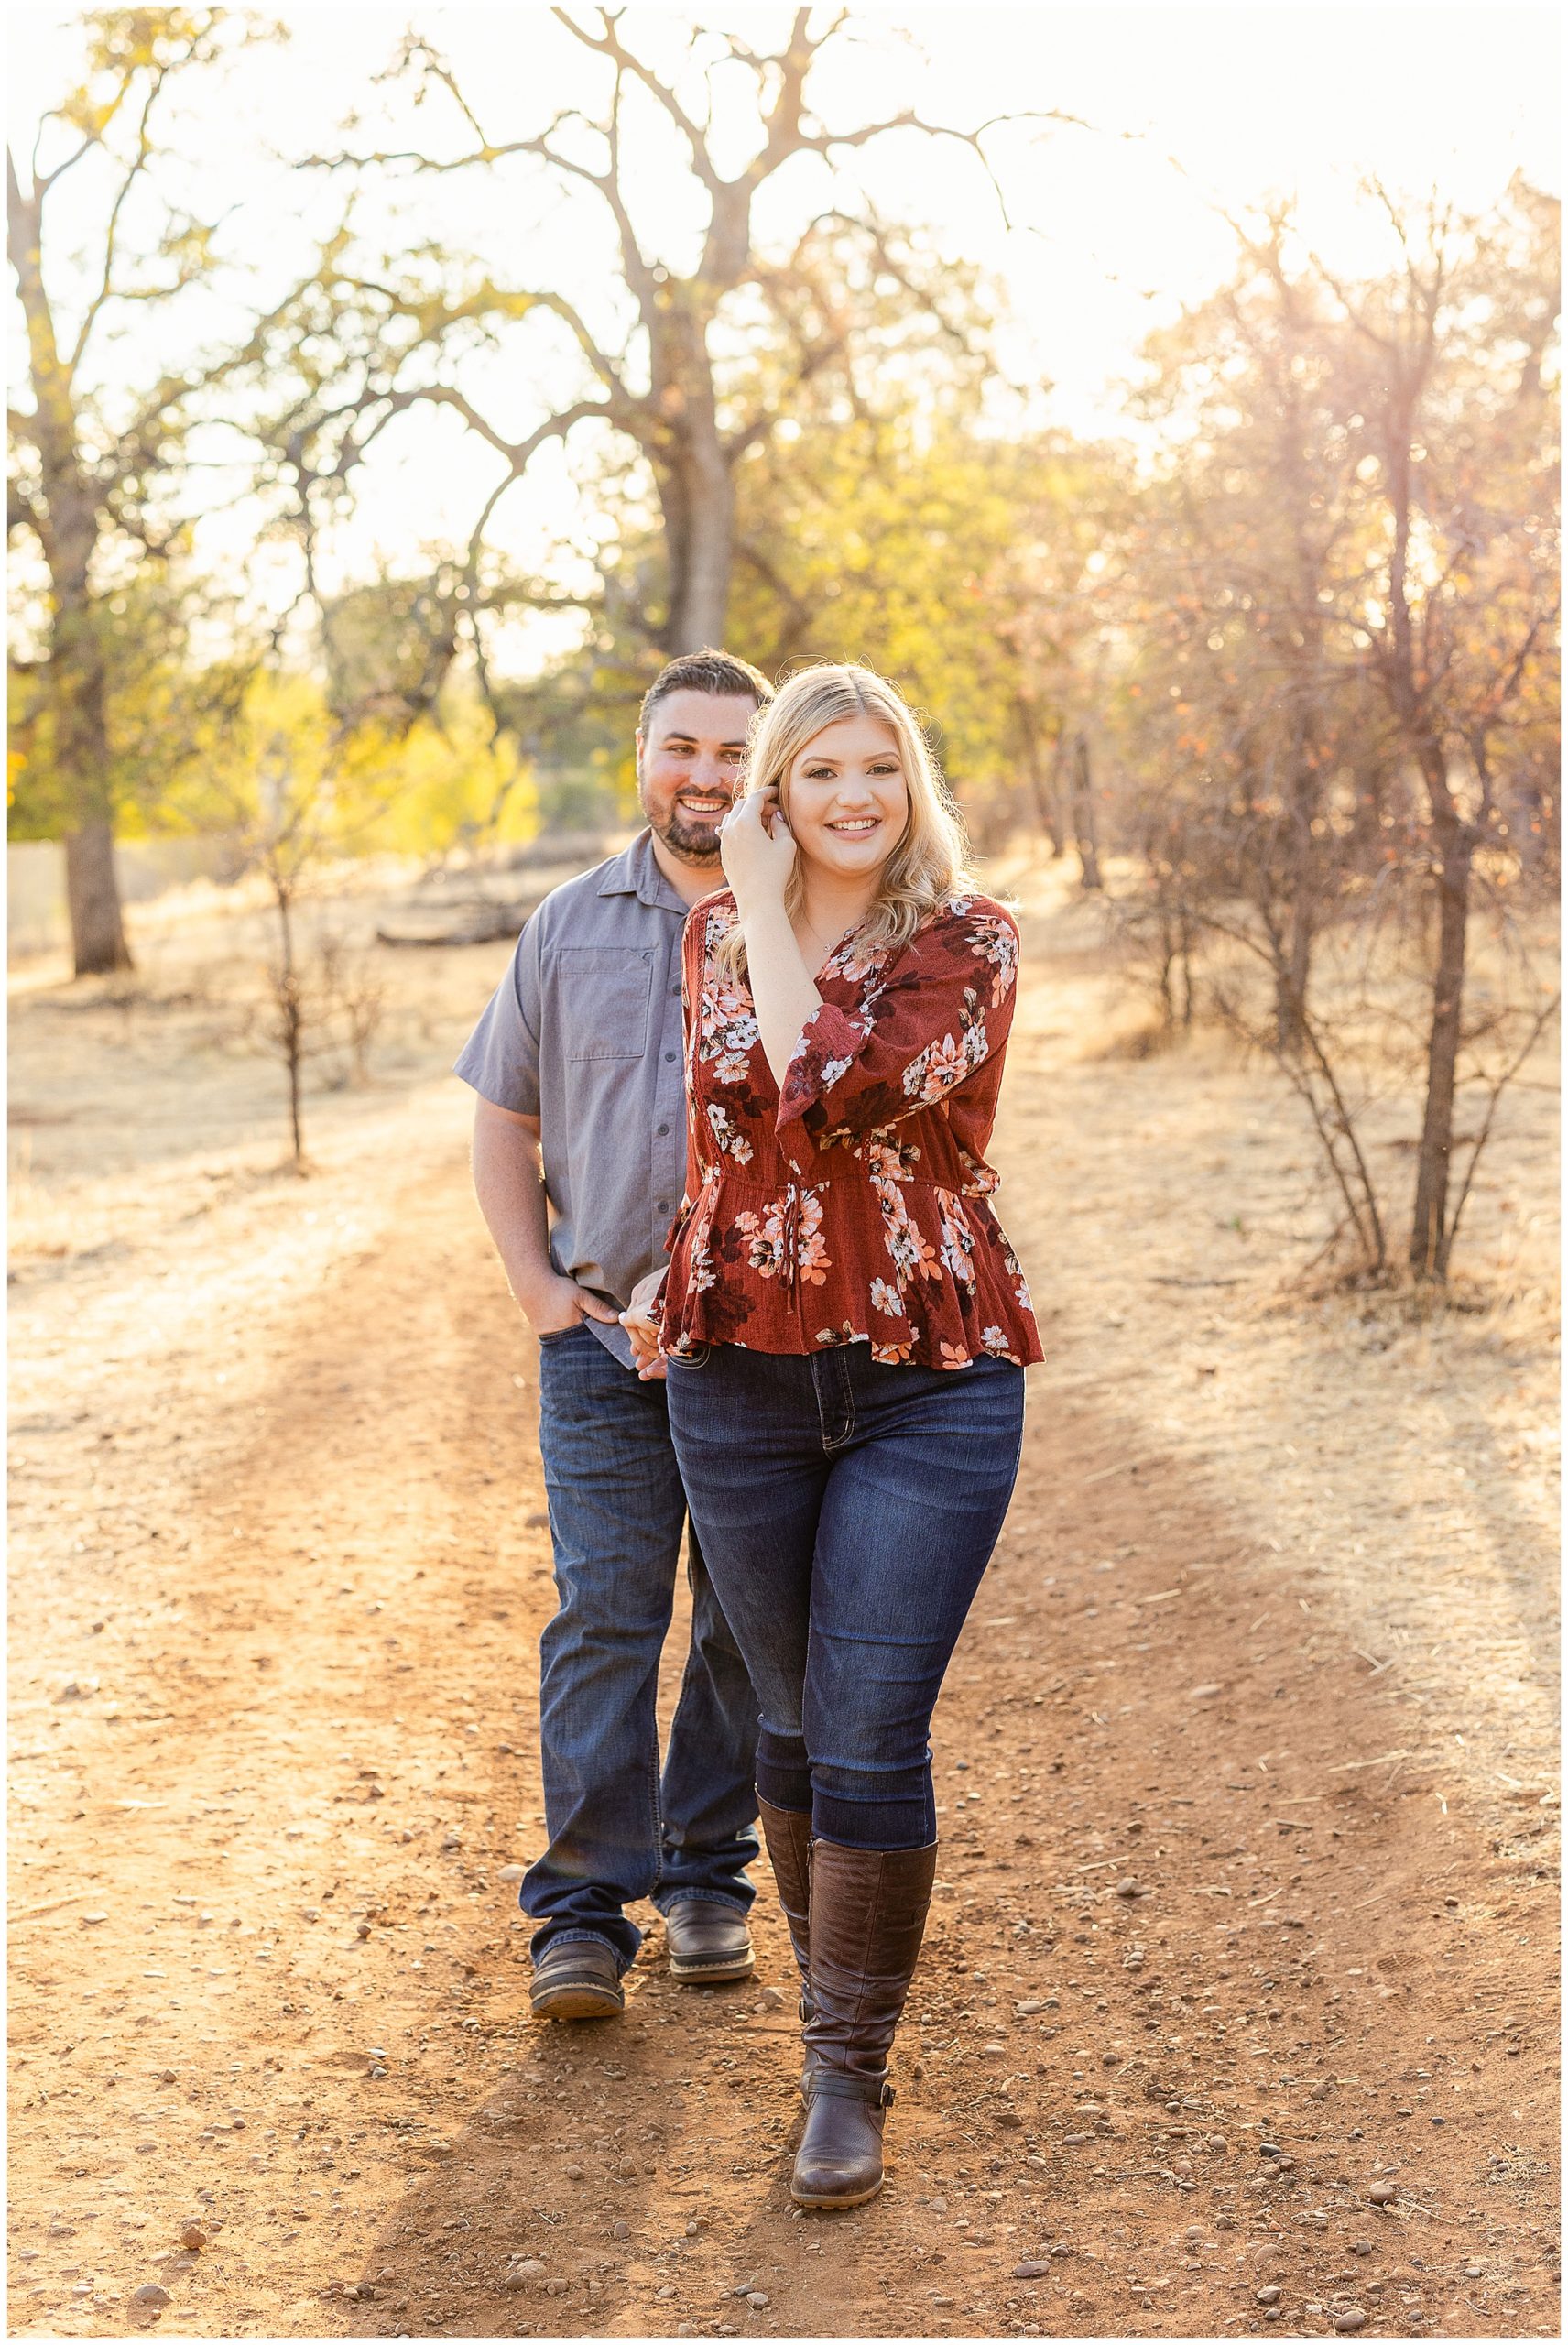 Upper Bidwell Park Engagement Session Chico CA Trail Fall September Yellow Flowers_0003.jpg